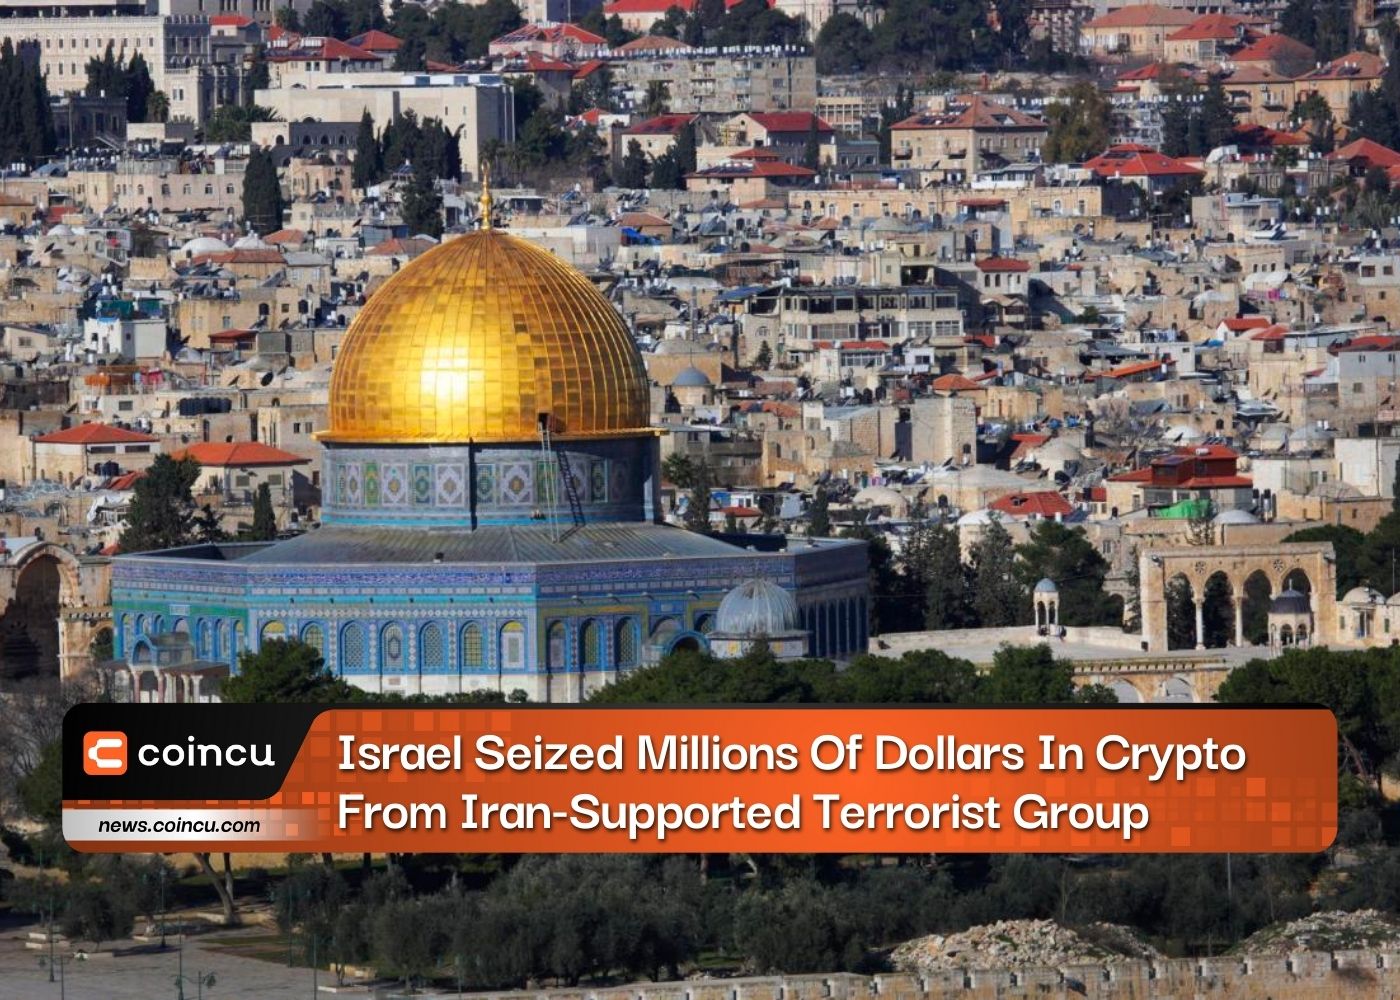 Israel Seized Millions Of Dollars In Crypto From Iran-Supported Terrorist Group